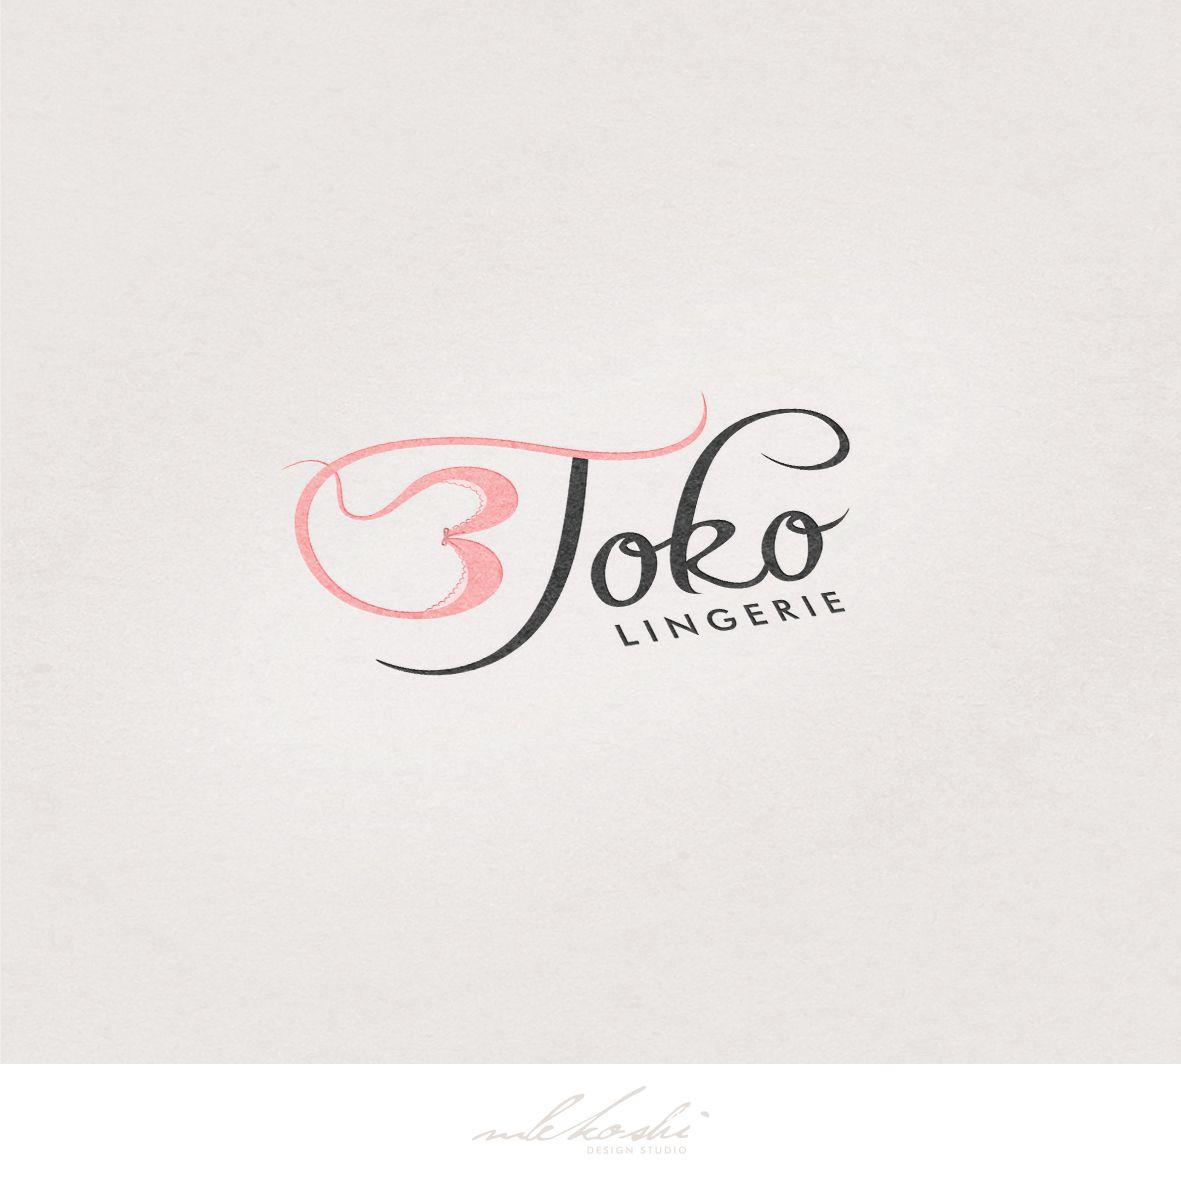 Lingerie Logo - Chic and cute logo design created for lingerie company - 3Toko ...